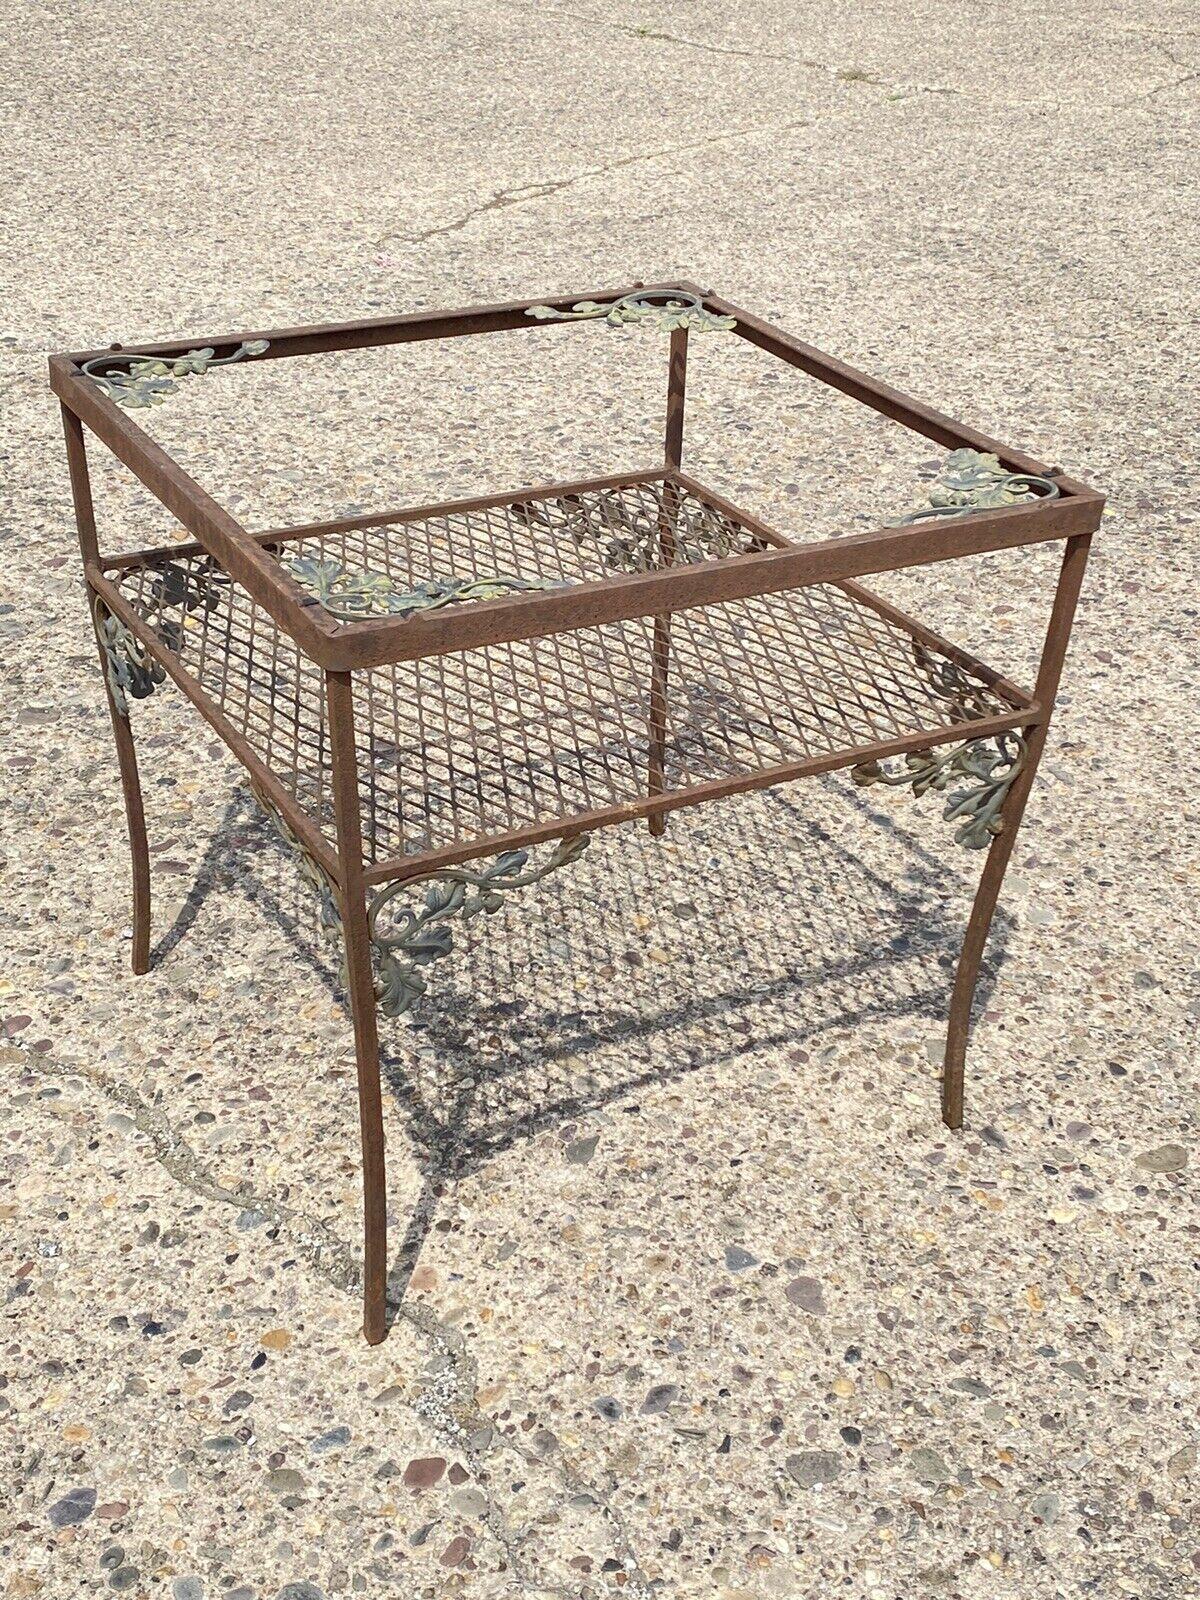 Vintage Woodard Orleans Pattern Wrought Iron 2 Tier Garden Patio Side Table (No glass). Circa Mid 20th Century. Measurements: 24